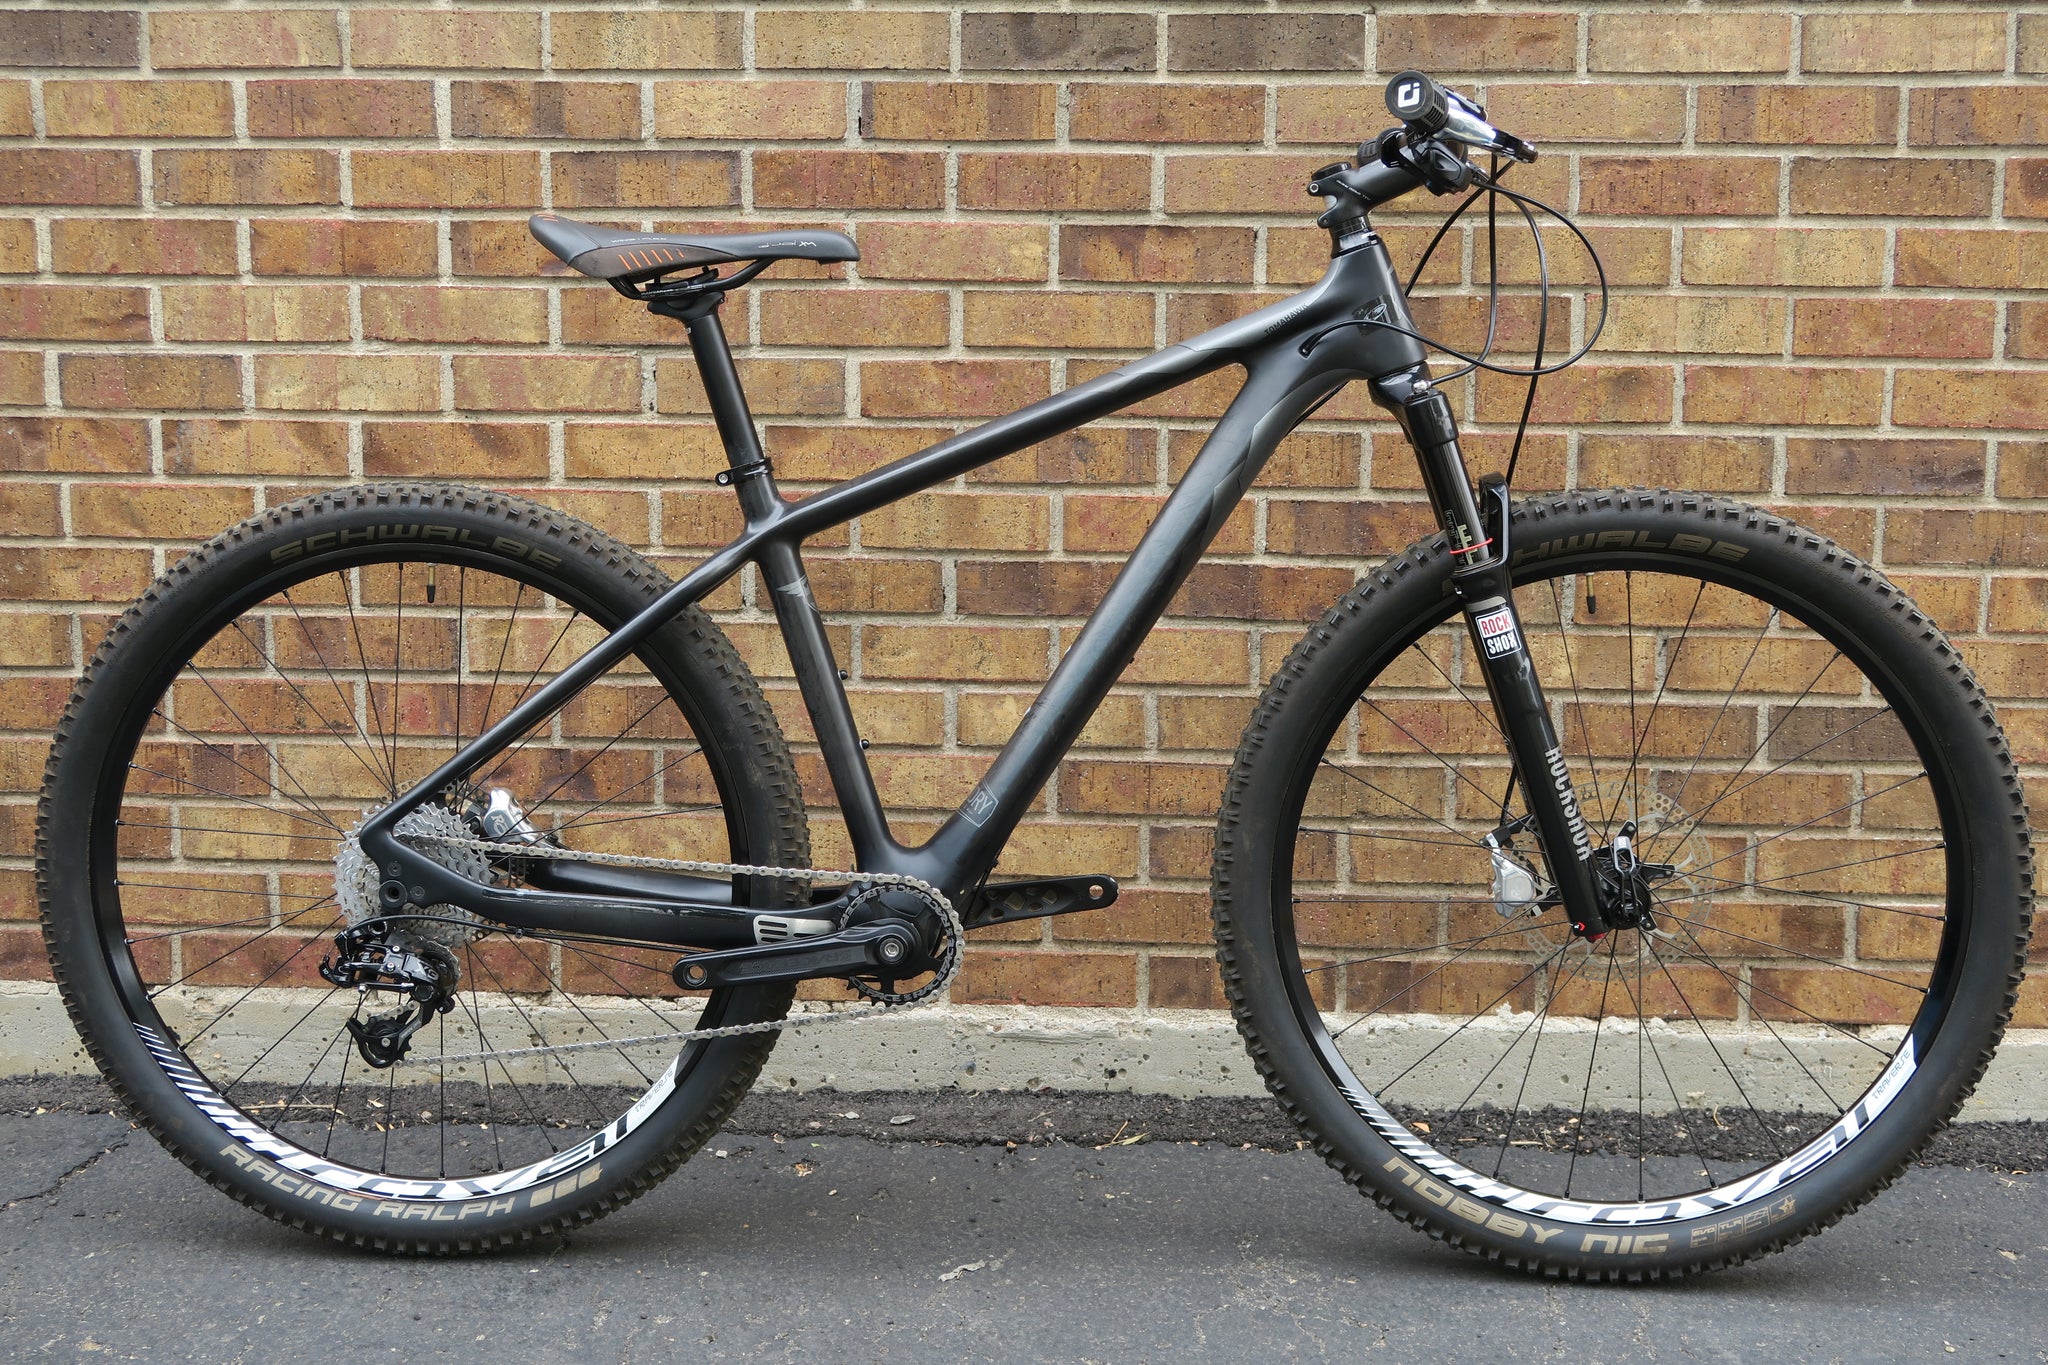 2015 FOUNDRY TOMAHAWK CARBON 27.5"